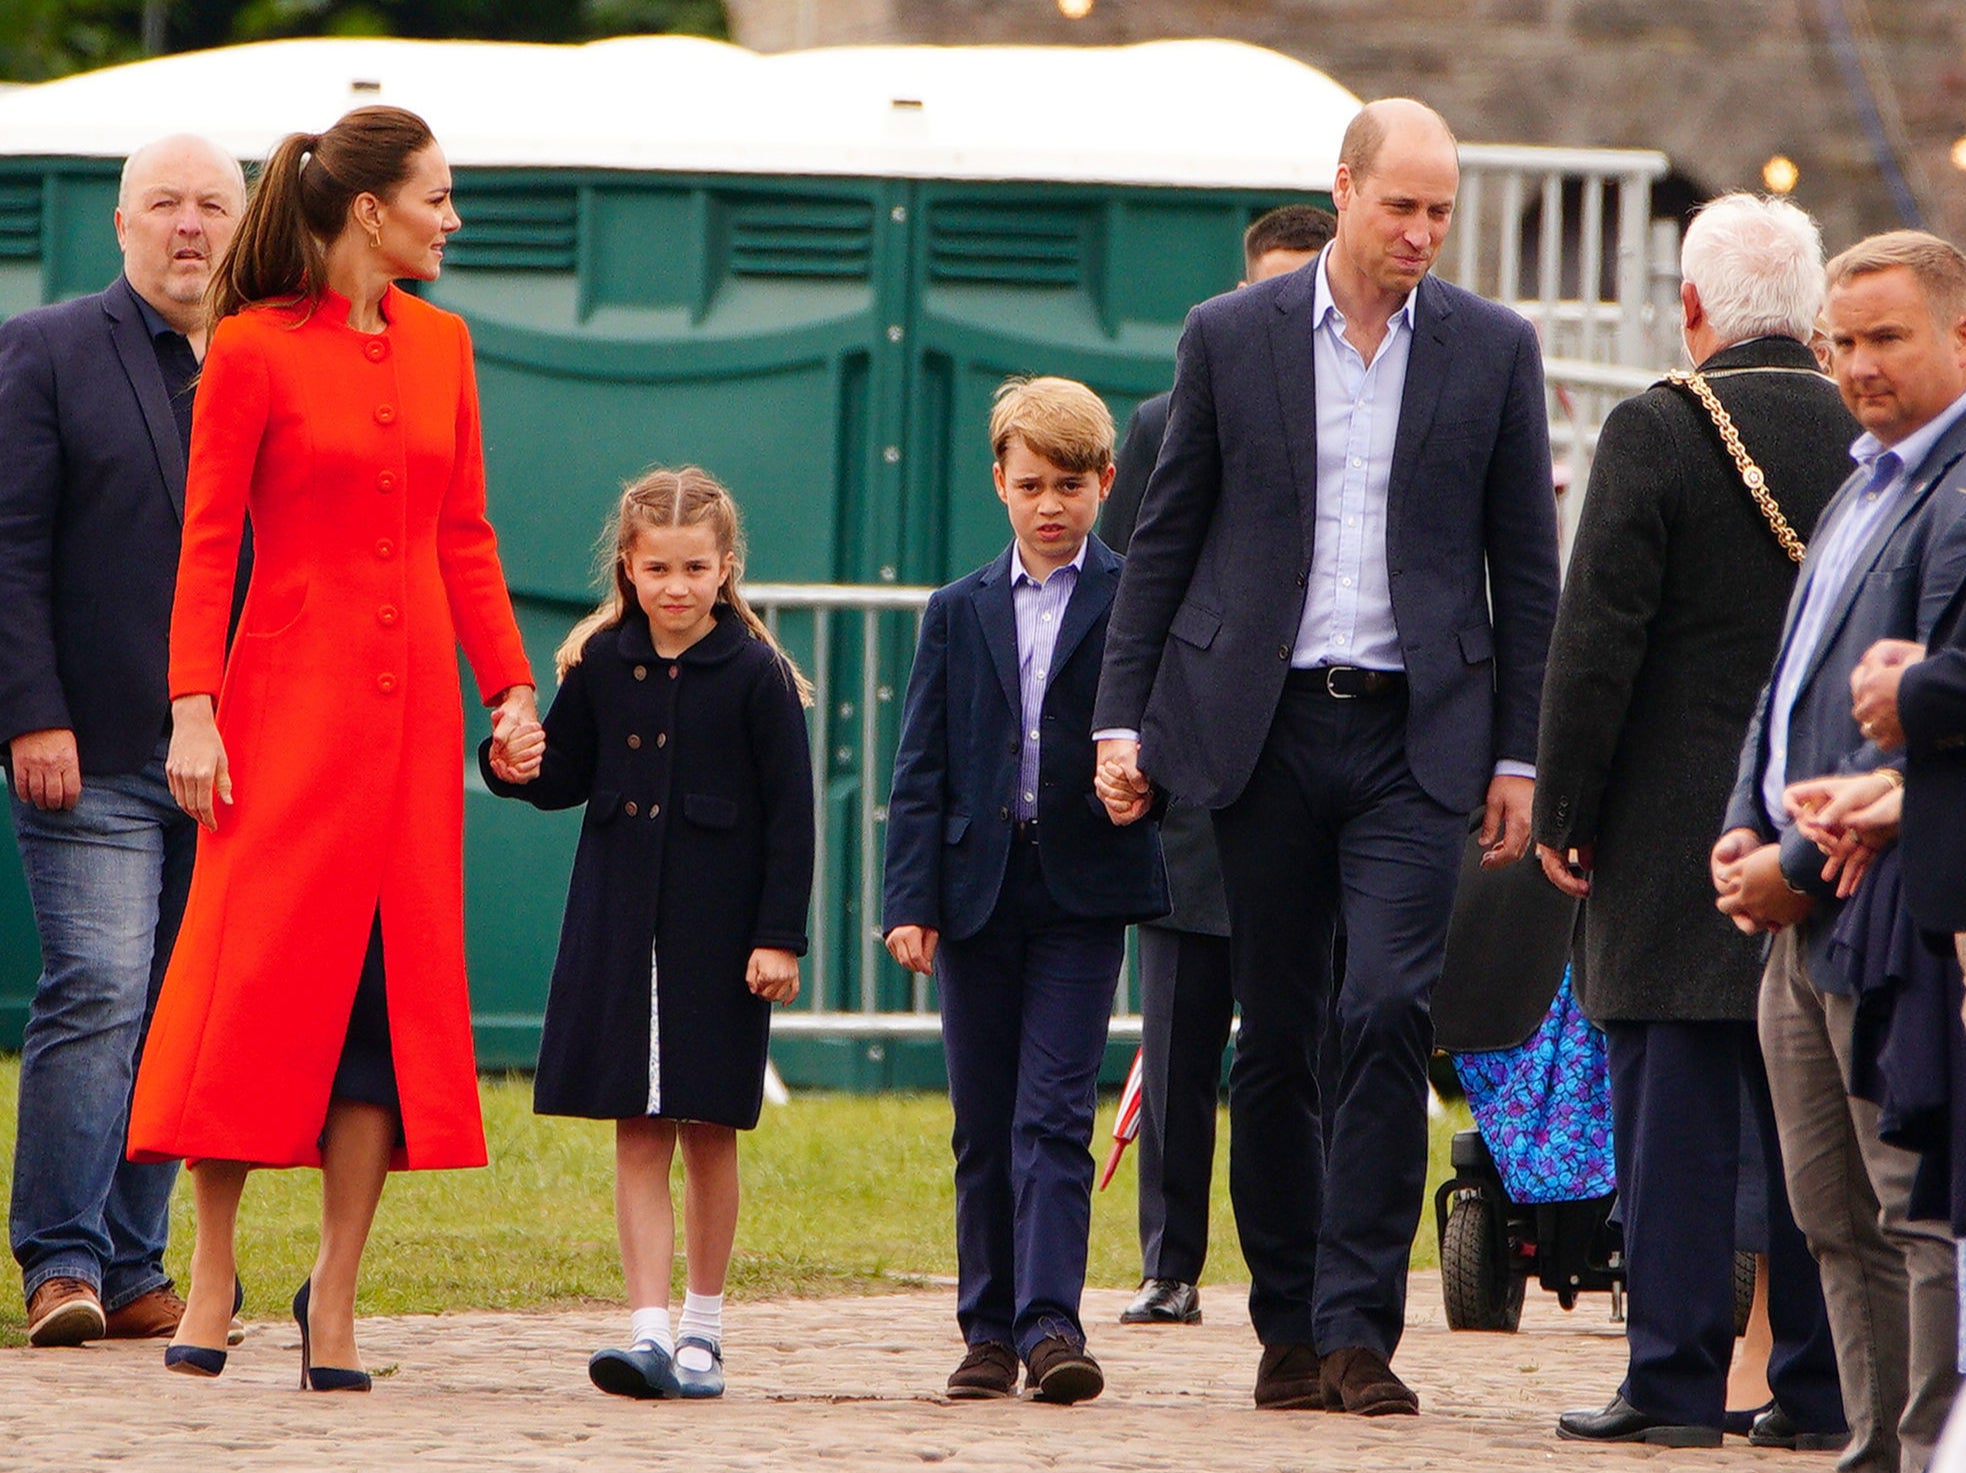 Prince George and Princess Charlotte joined the Duke and Duchess of Cambridge in Cardiff for jubilee celebrations